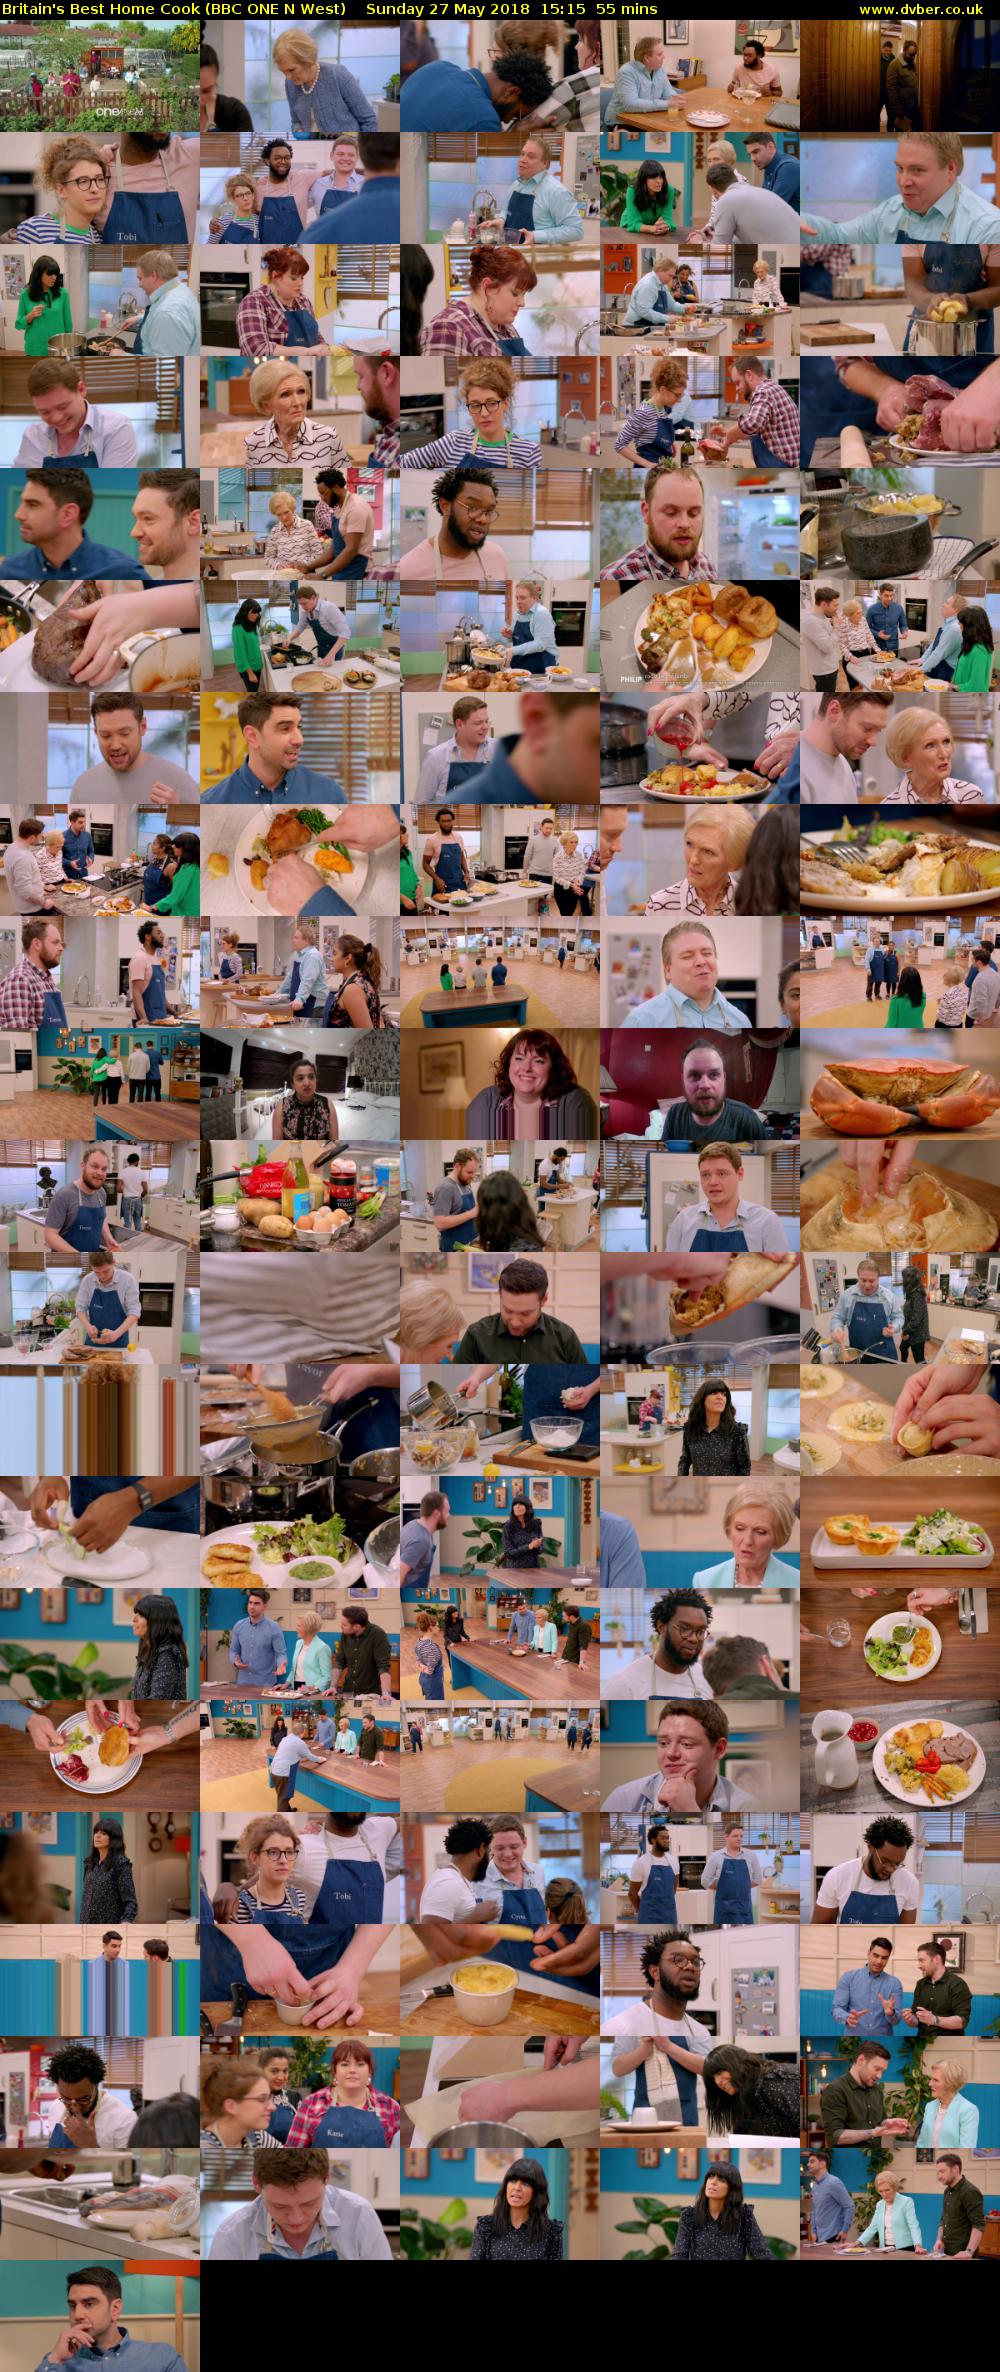 Britain's Best Home Cook (BBC ONE N West) Sunday 27 May 2018 15:15 - 16:10